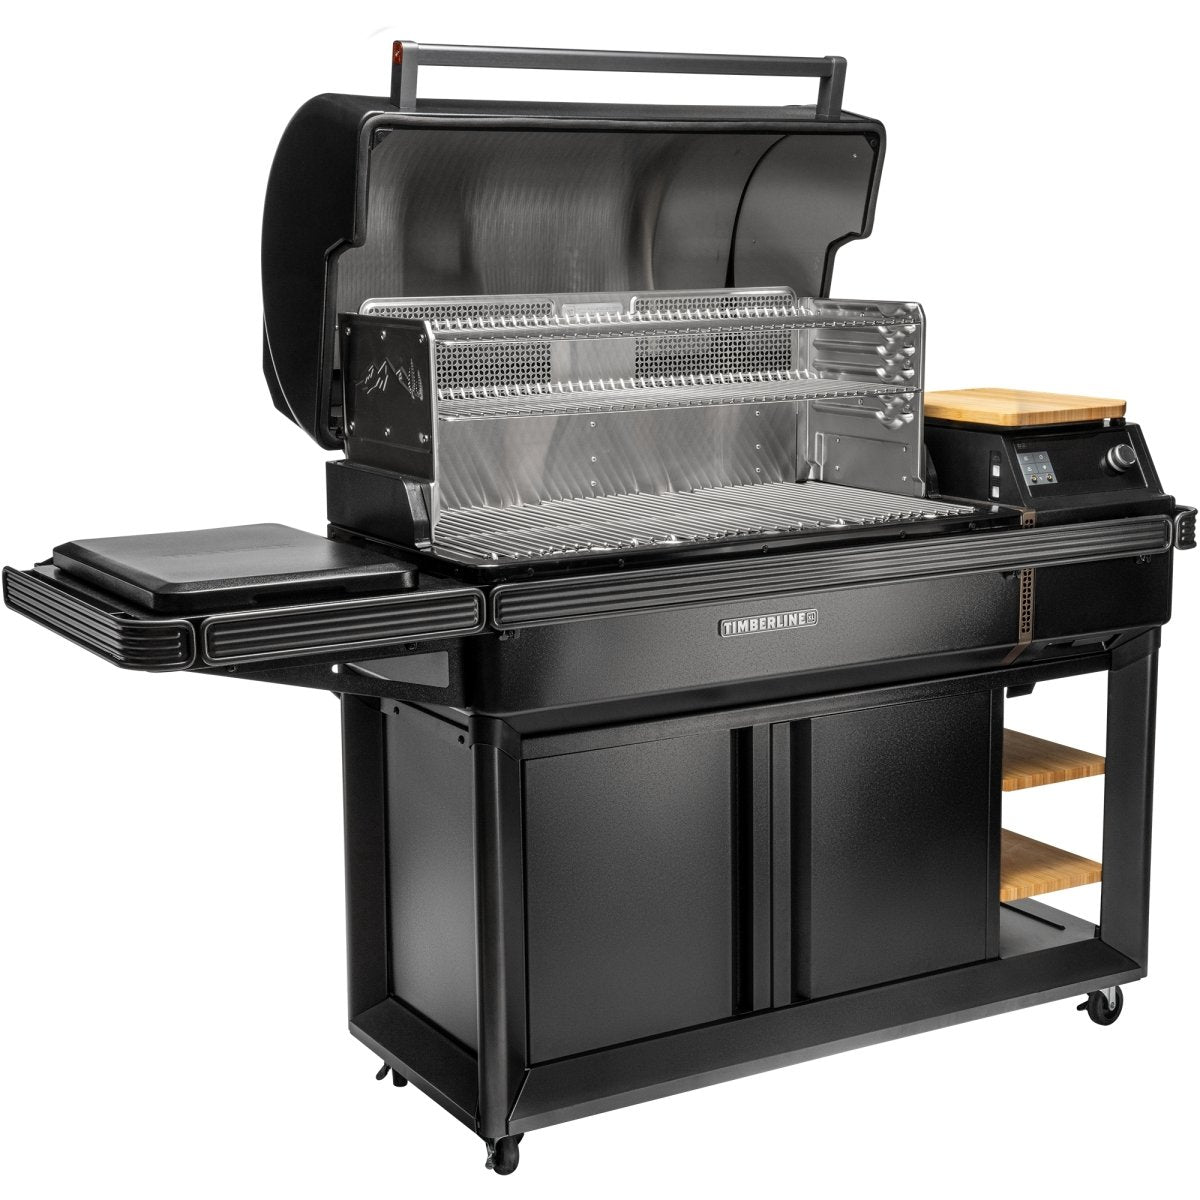 Traeger Ironwood XL pellet grill review - Reviewed